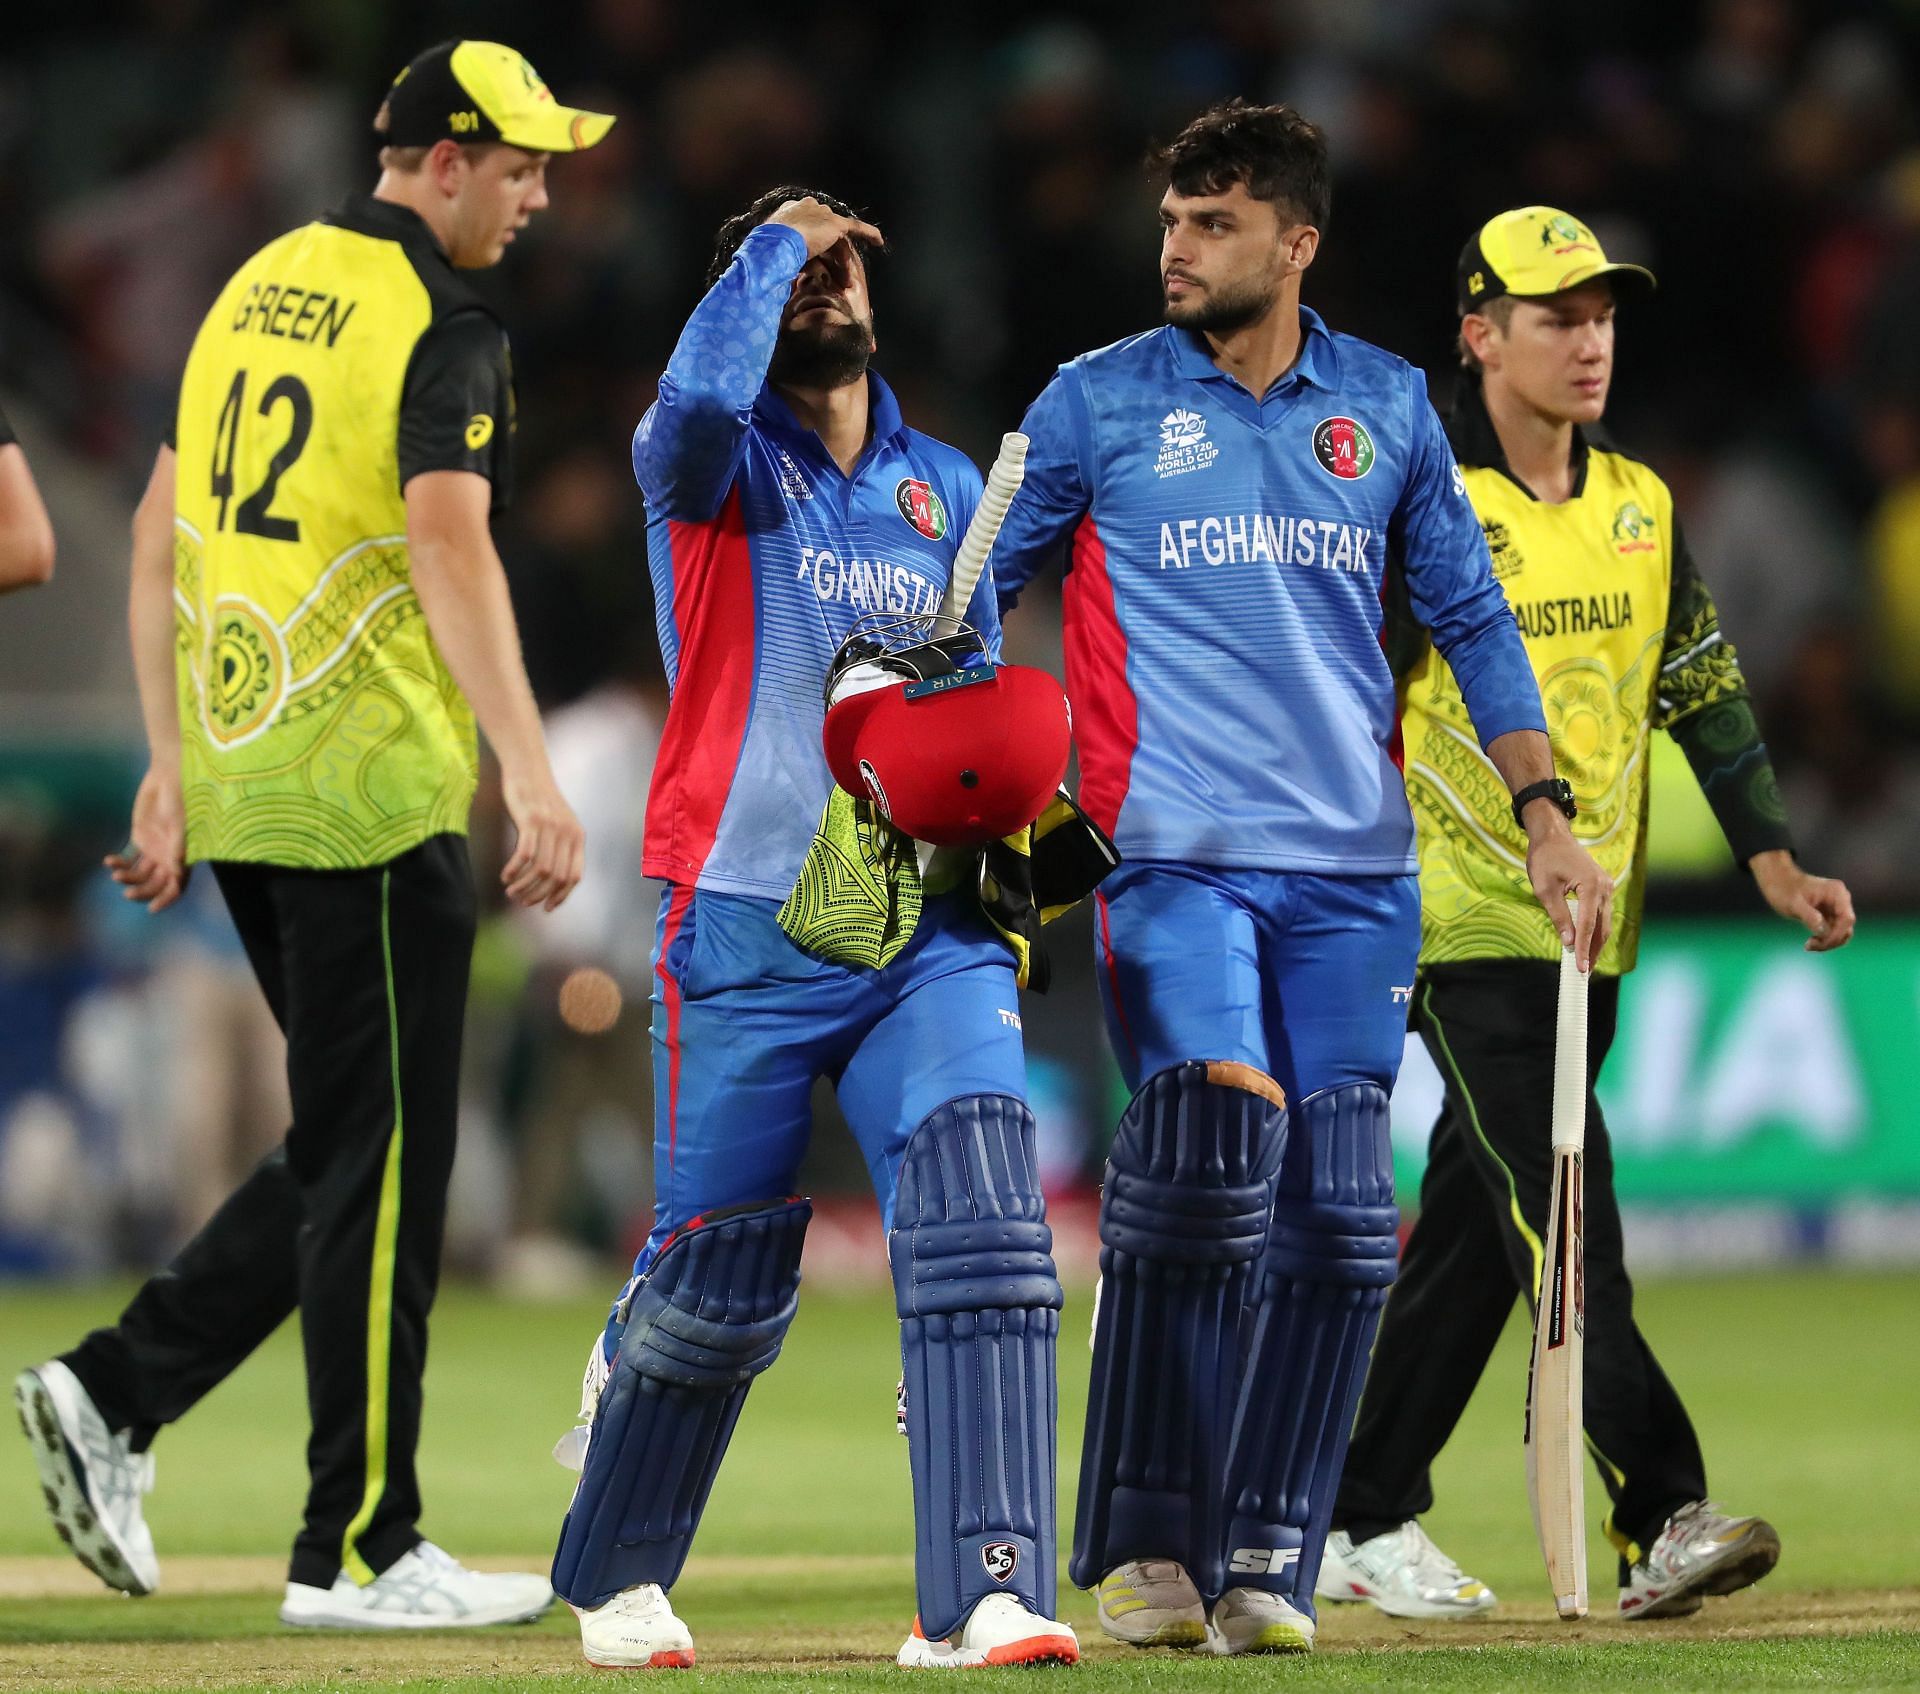 Afghanistan came ominously came close to upstaging the hosts in the T20 World Cup. (Credits: Getty)